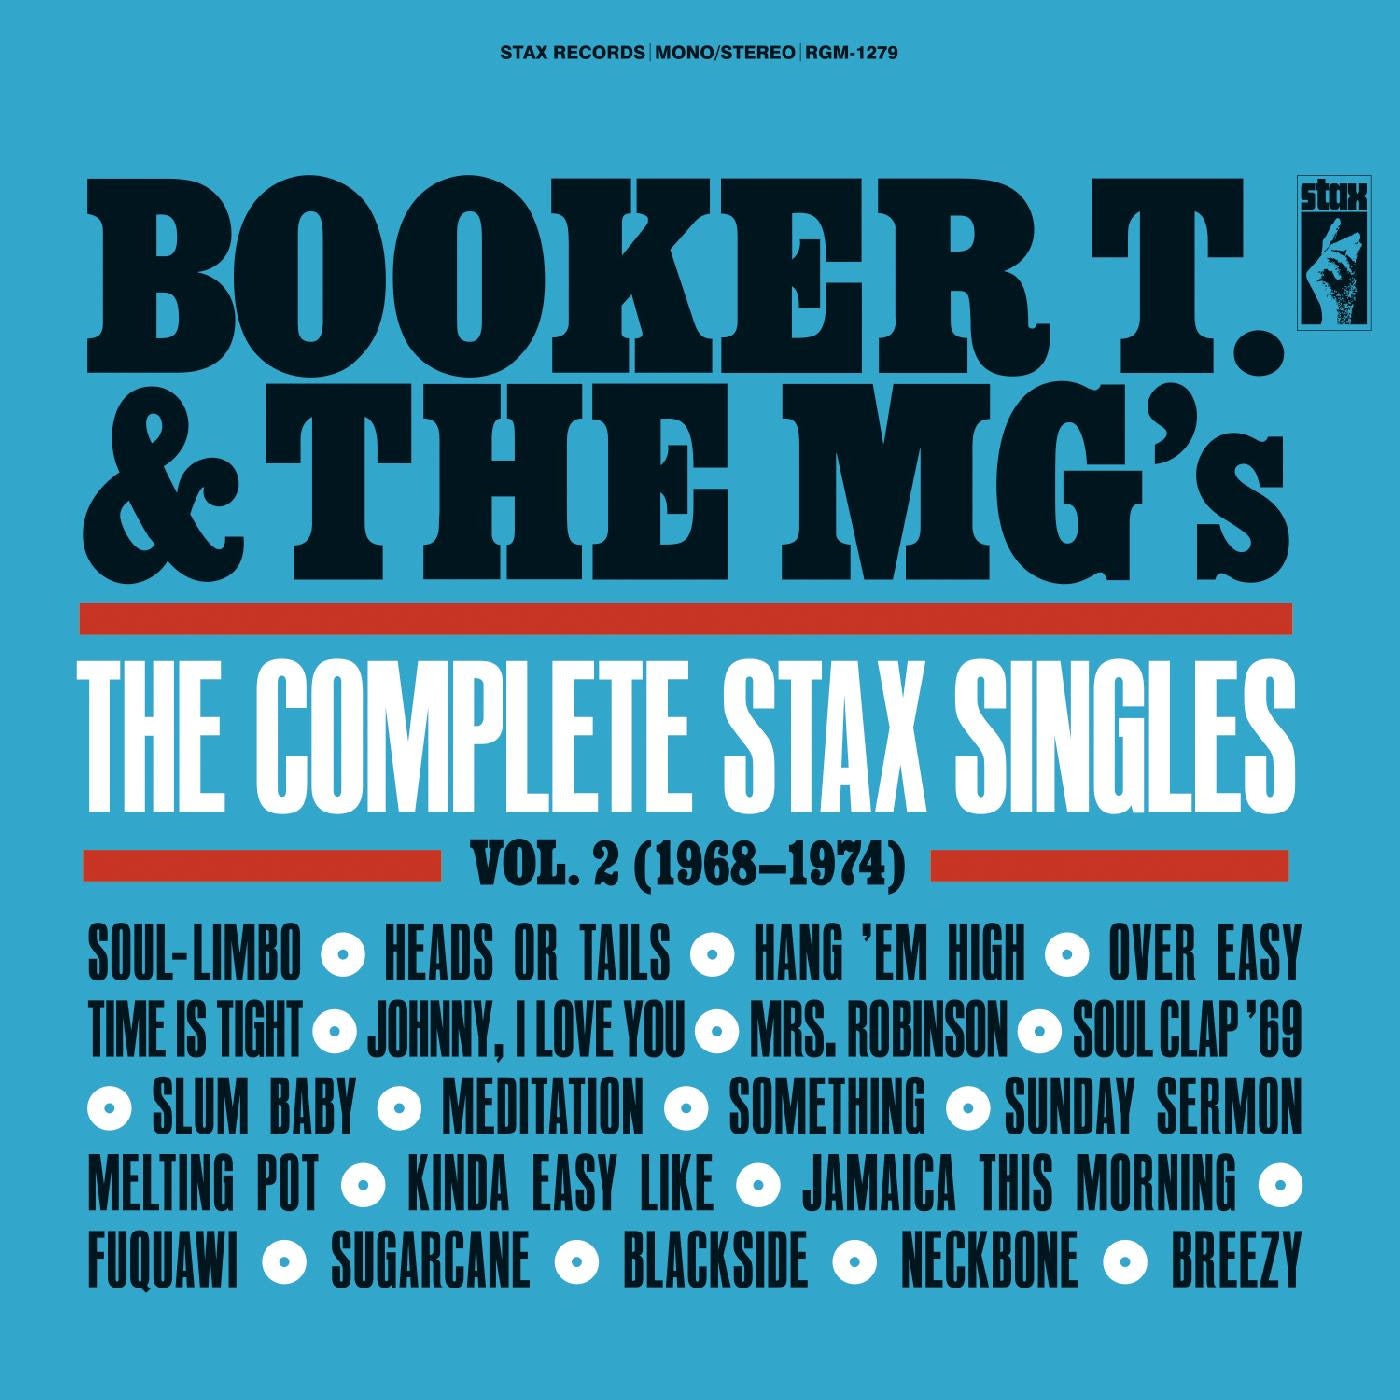 The Complete Stax Singles Vol. 2 (1968-1974)